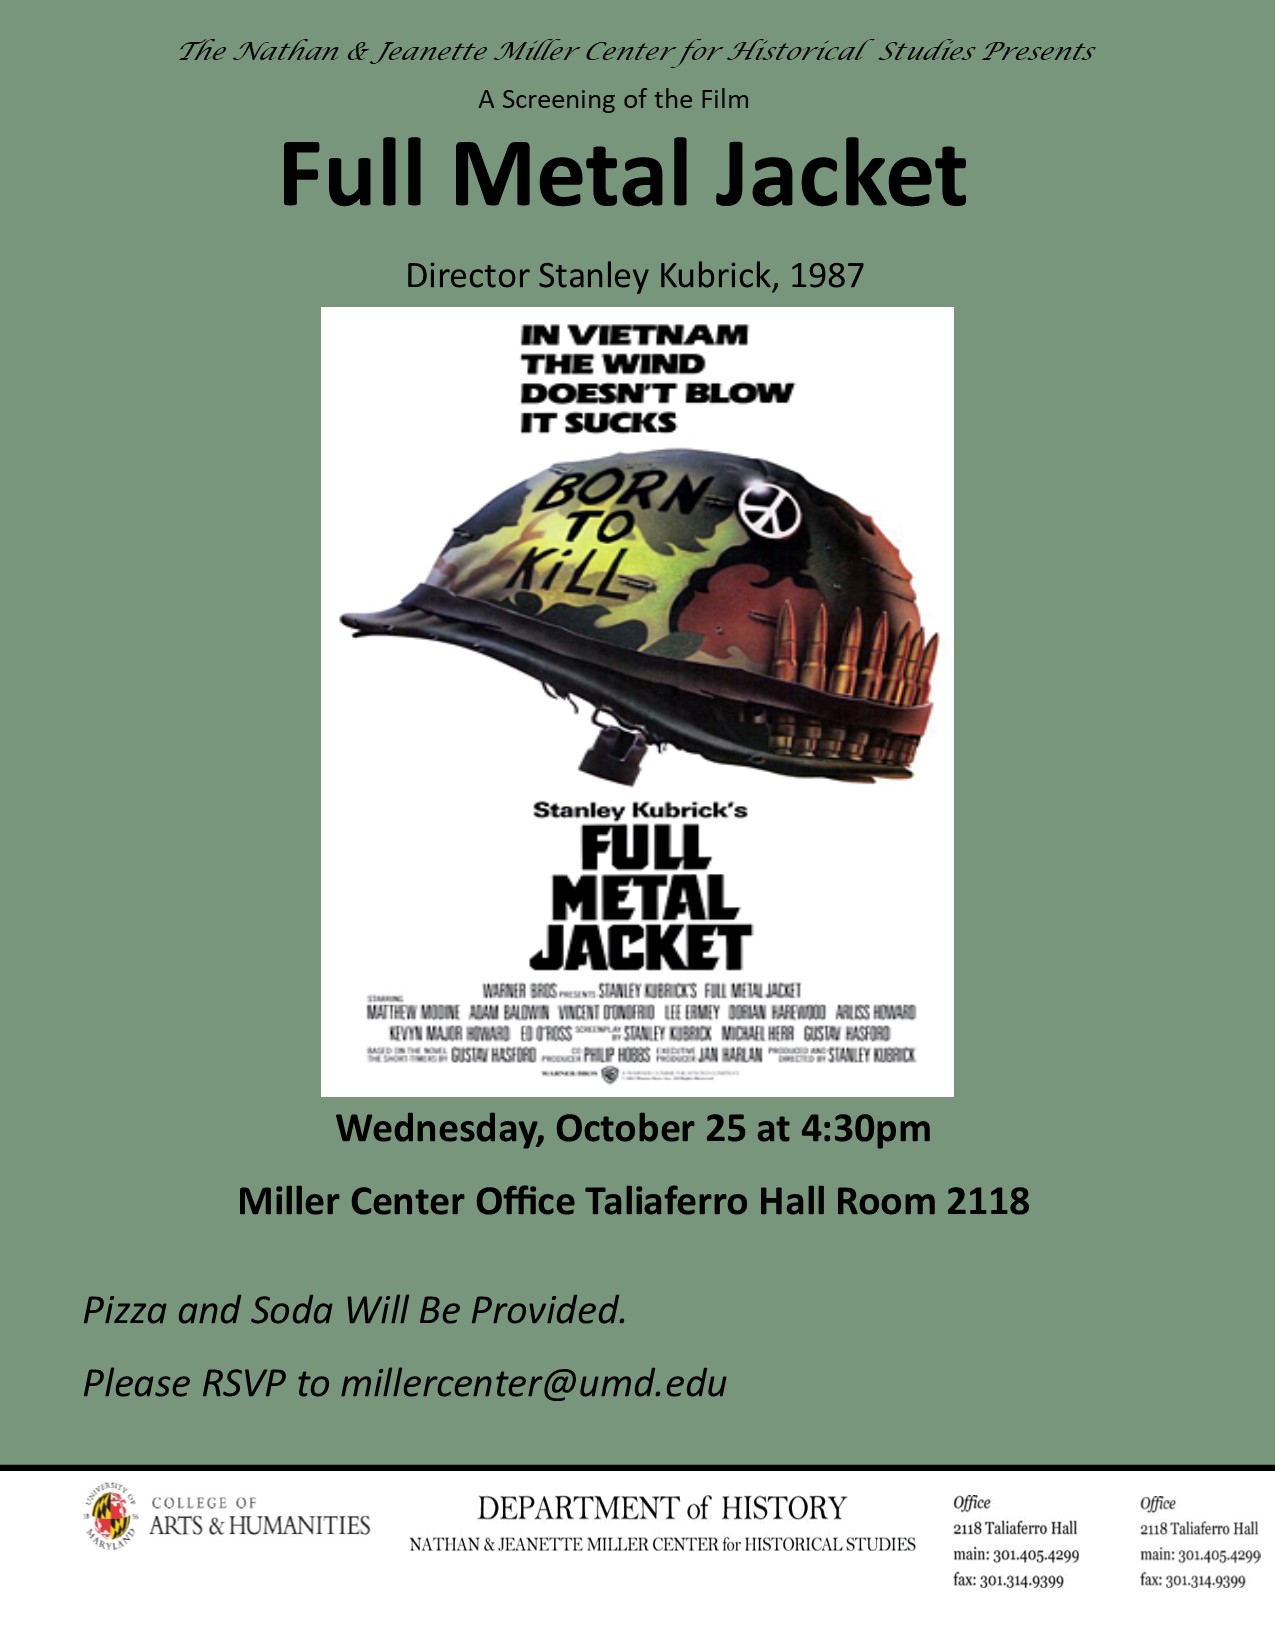 Image for event - Full Metal Jacket